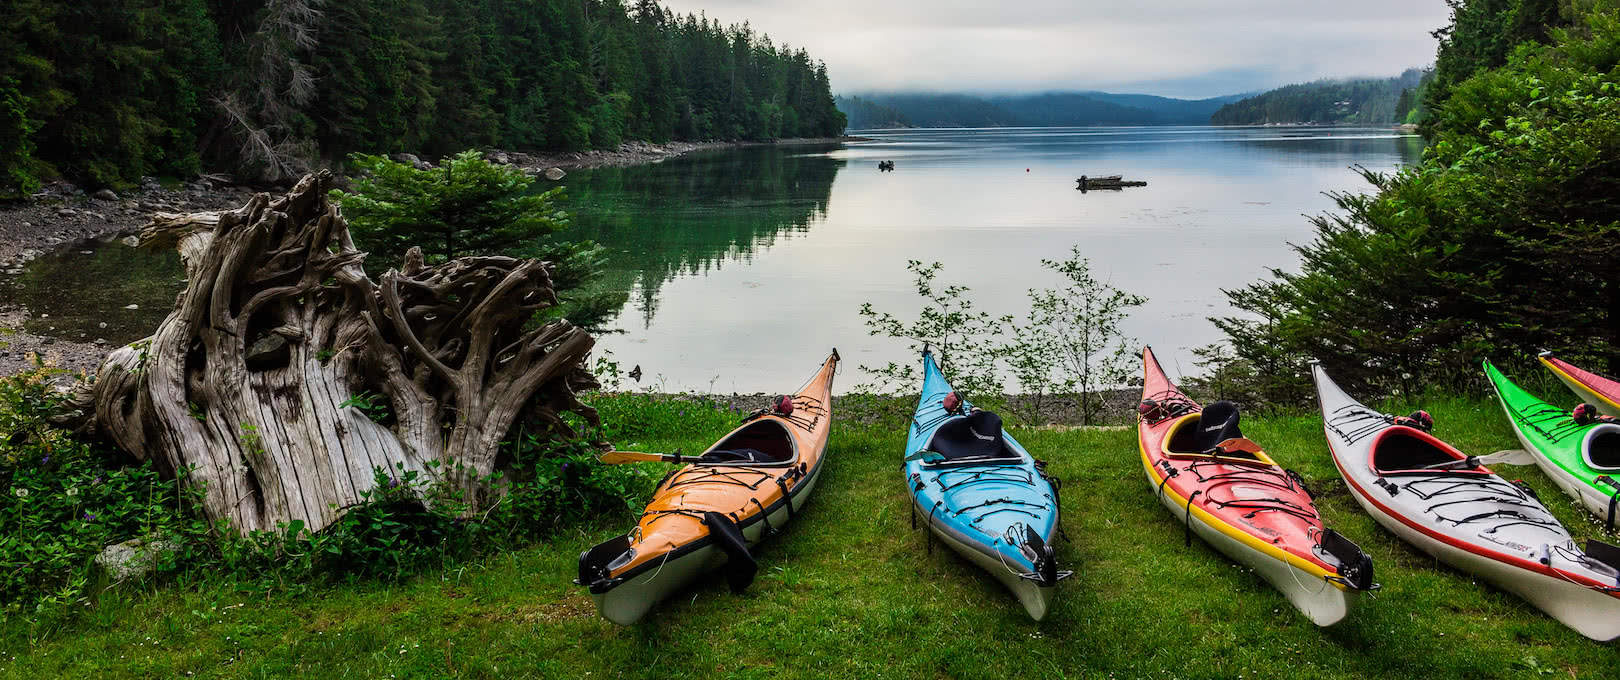 Kayaks staged for one of our multi-day kayak tours in Okeover Inlet, 120km north of Vancouver